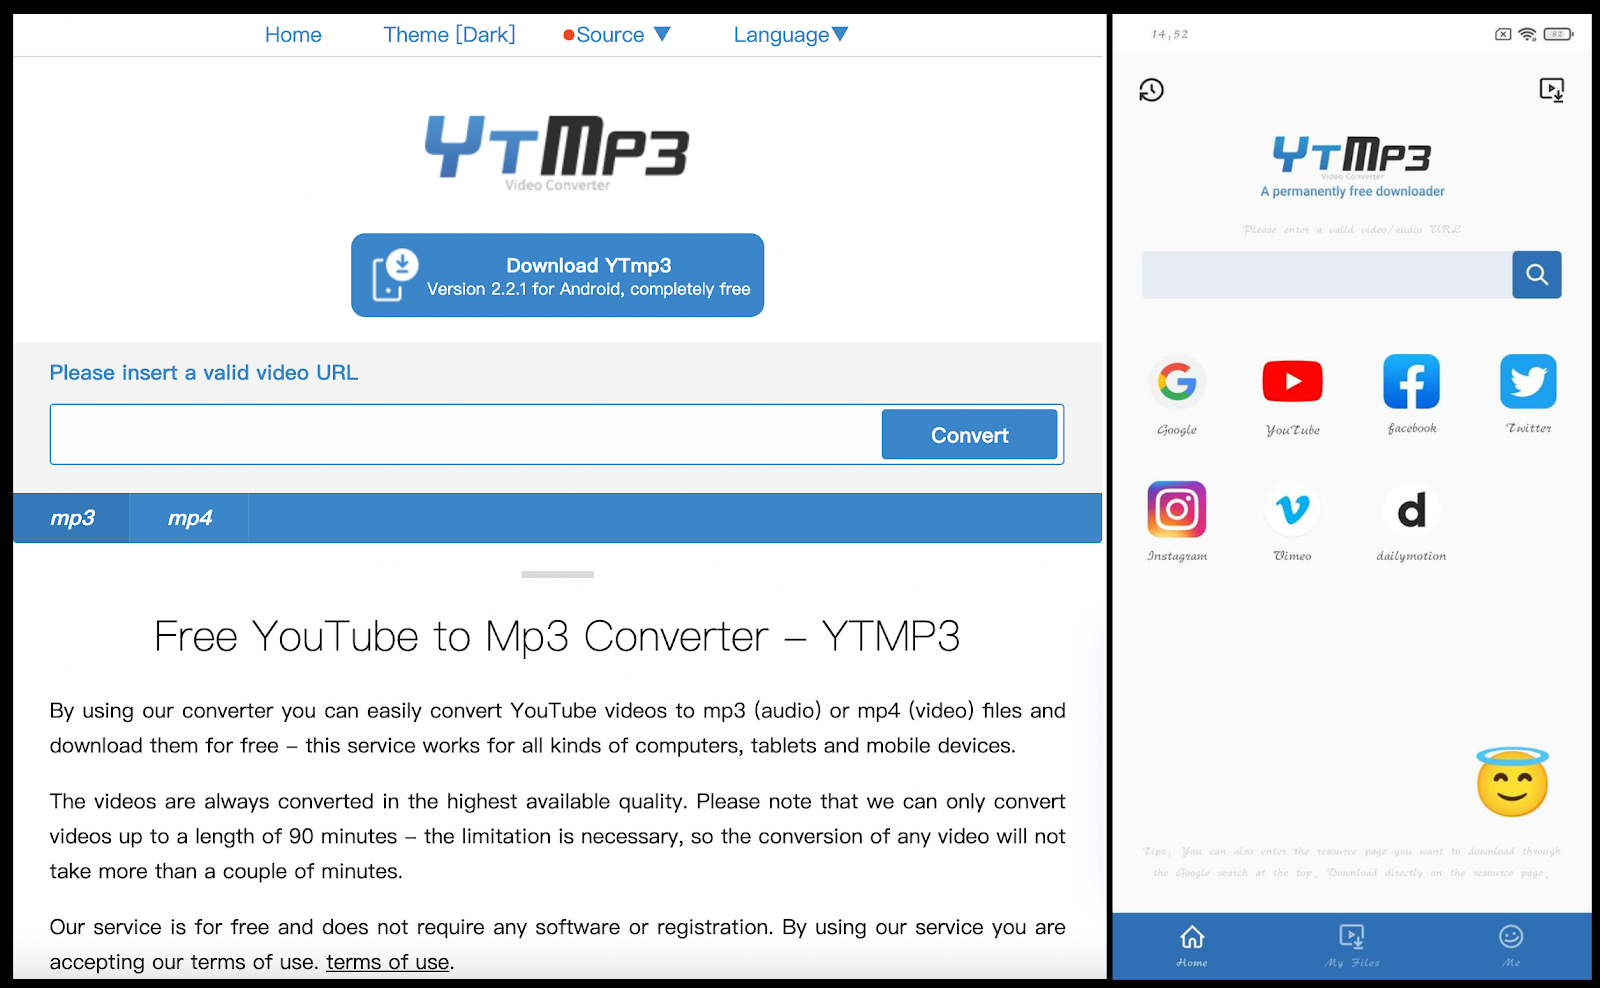 ytmp3 Converter: A Complete Guide